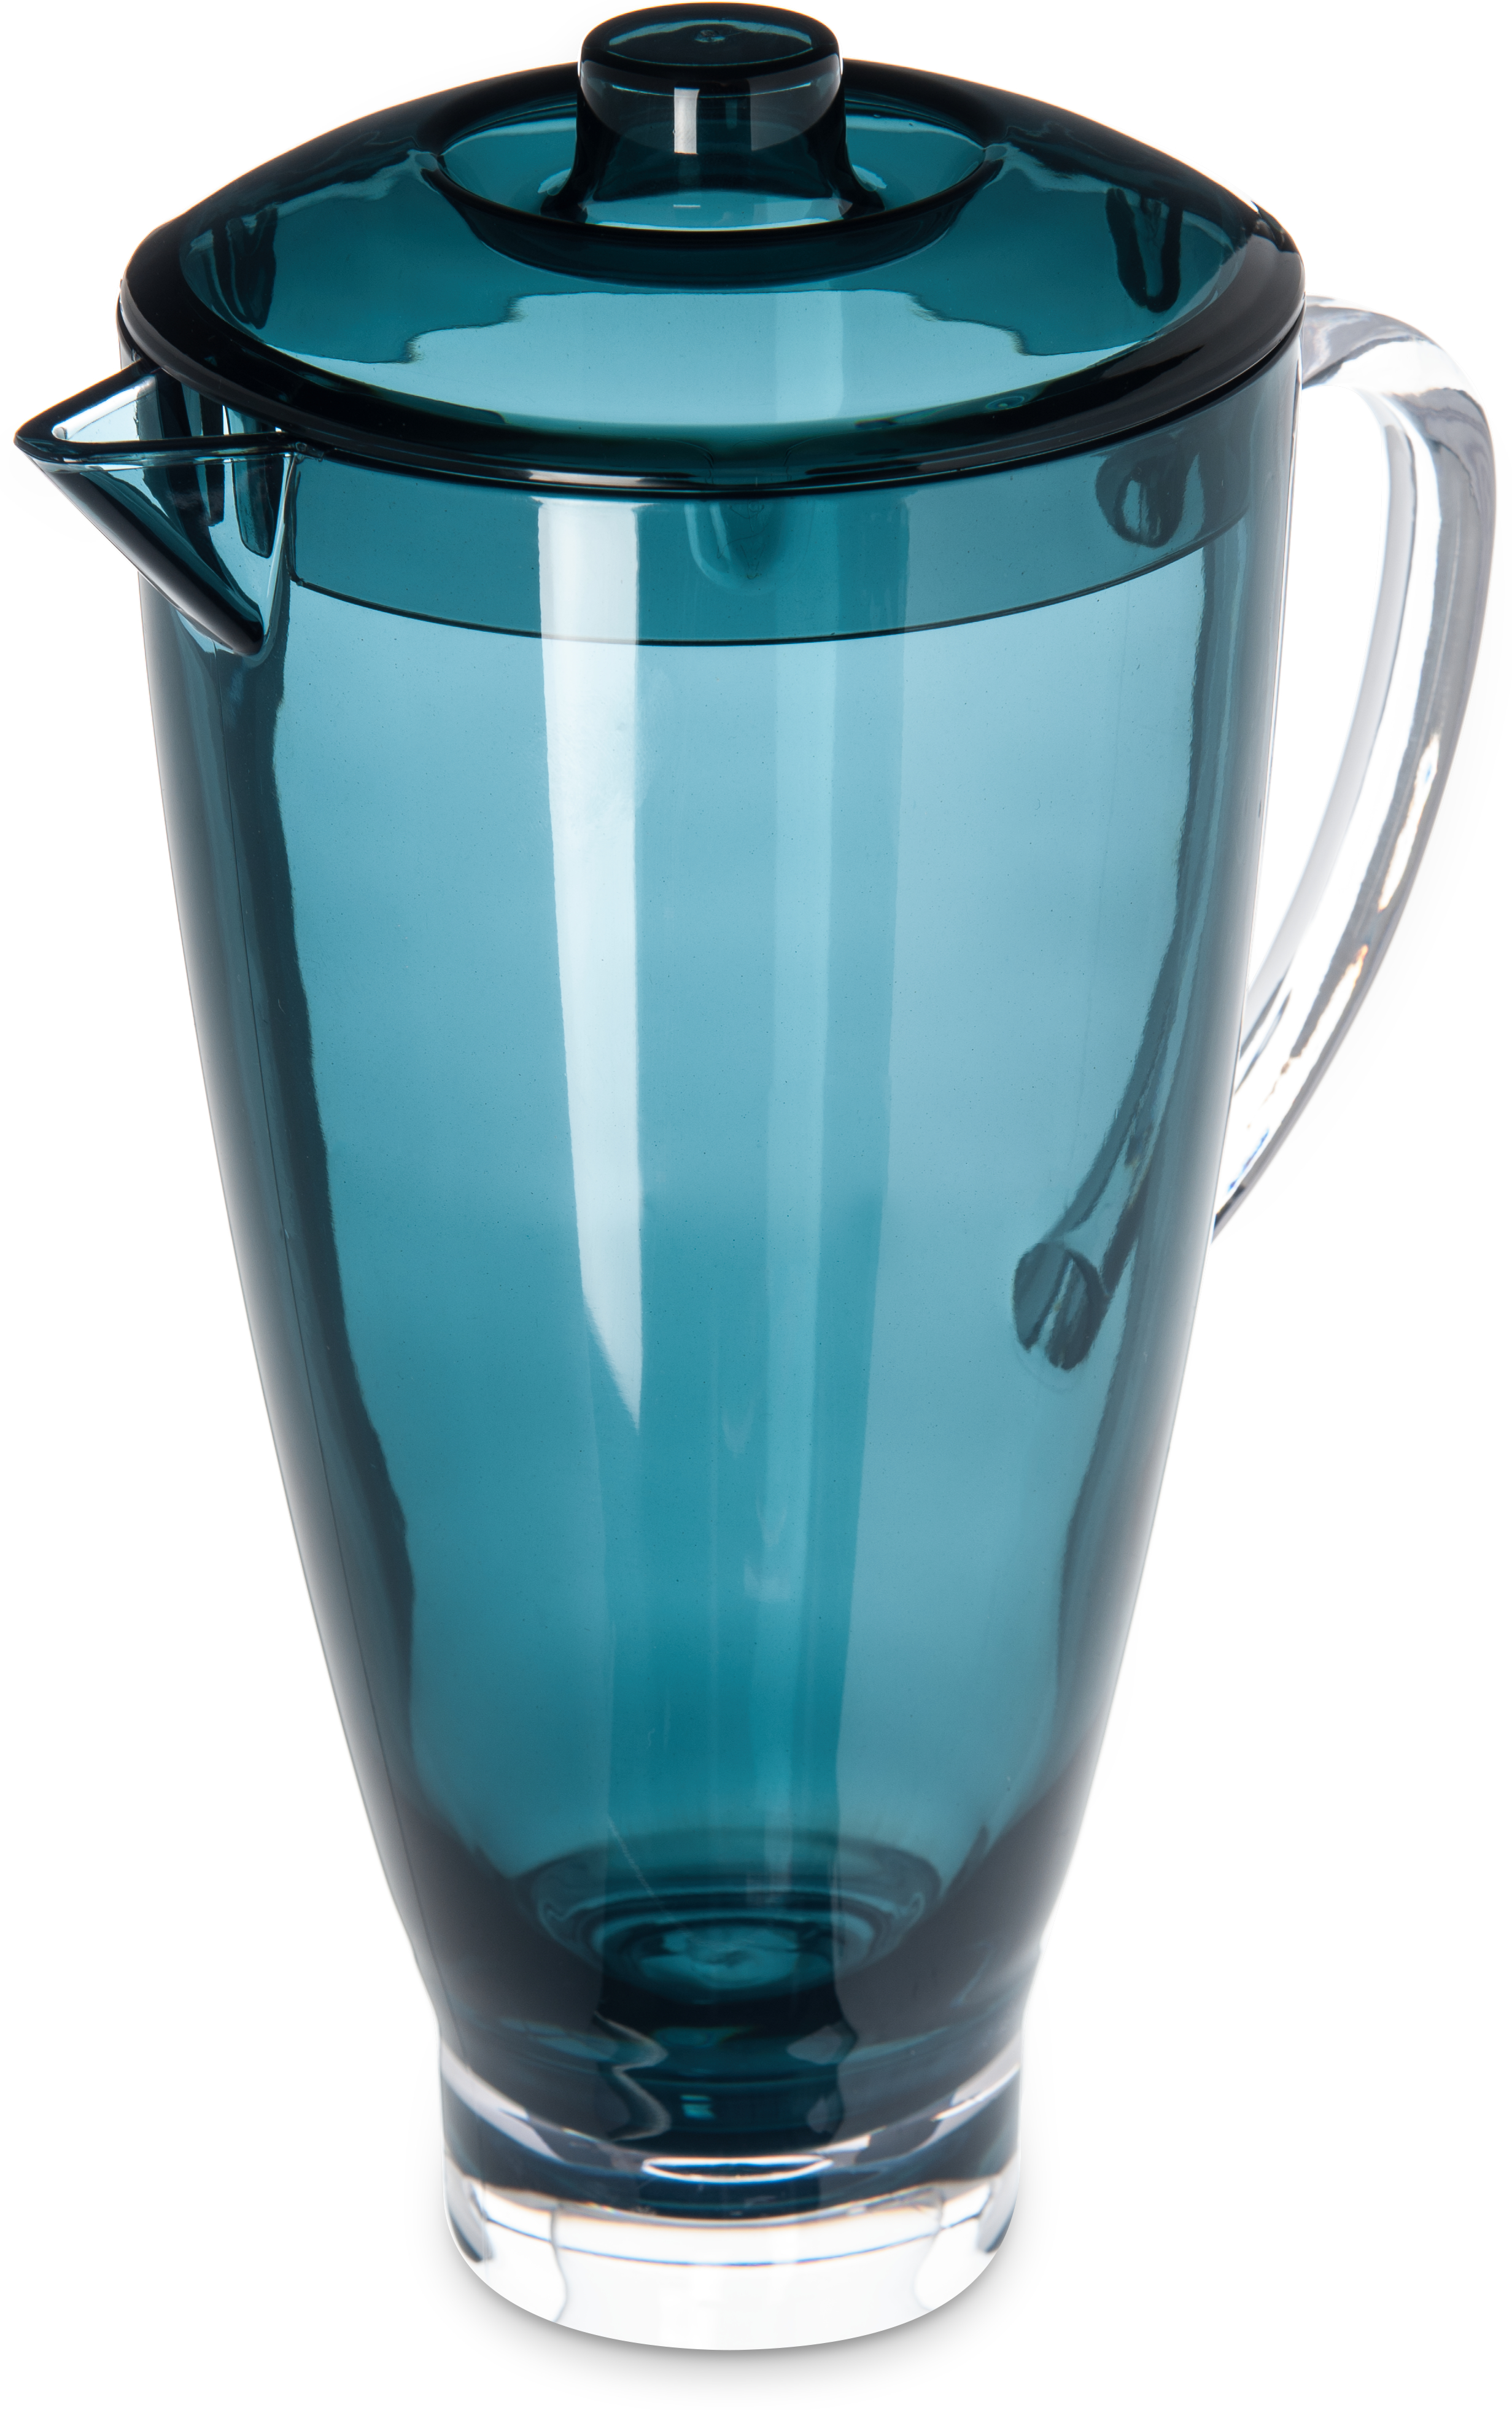 Epicure Cased Pitcher with Lid 74 oz - Teal